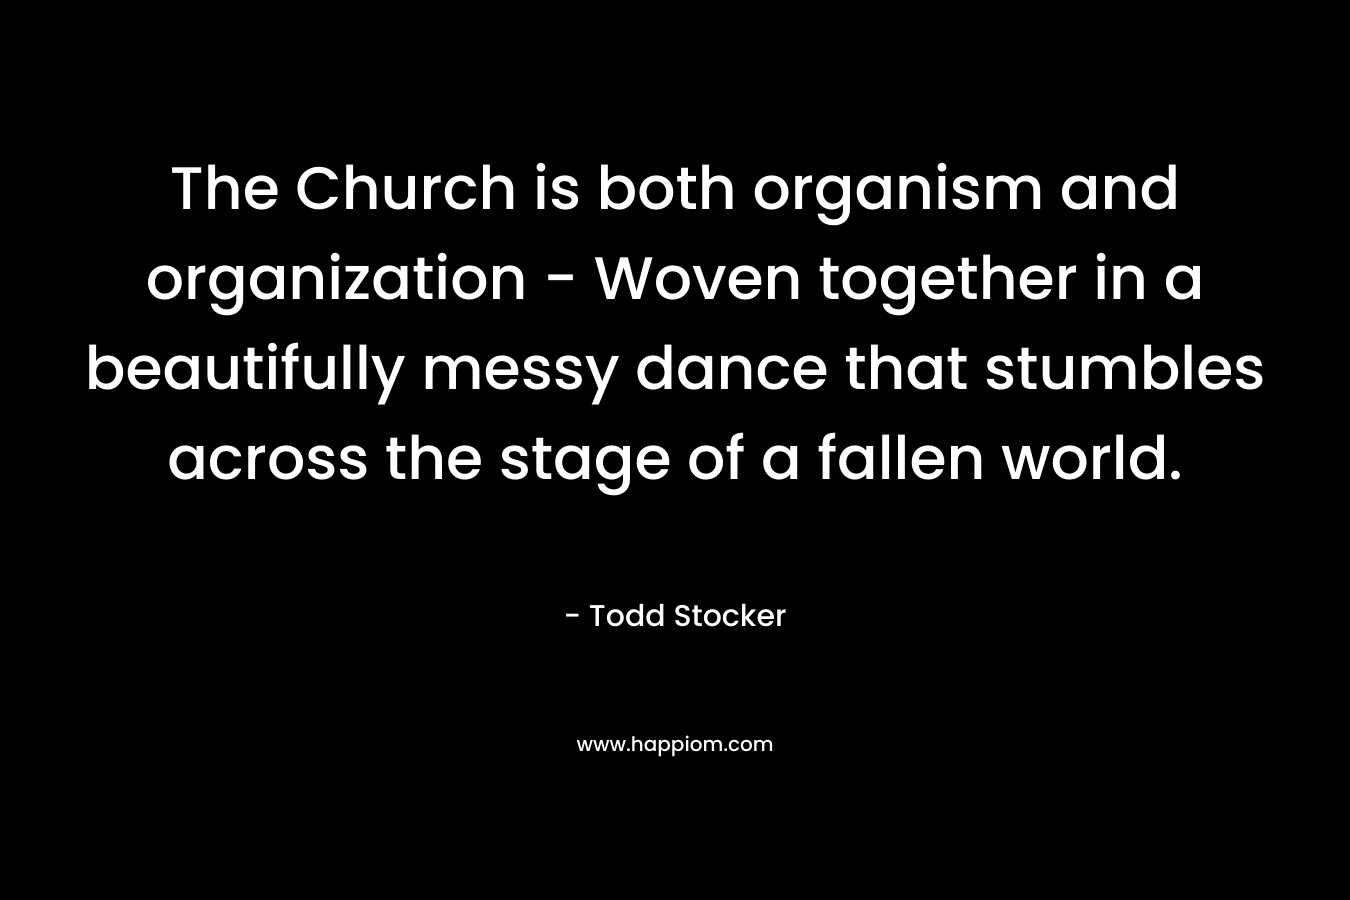 The Church is both organism and organization – Woven together in a beautifully messy dance that stumbles across the stage of a fallen world. – Todd Stocker